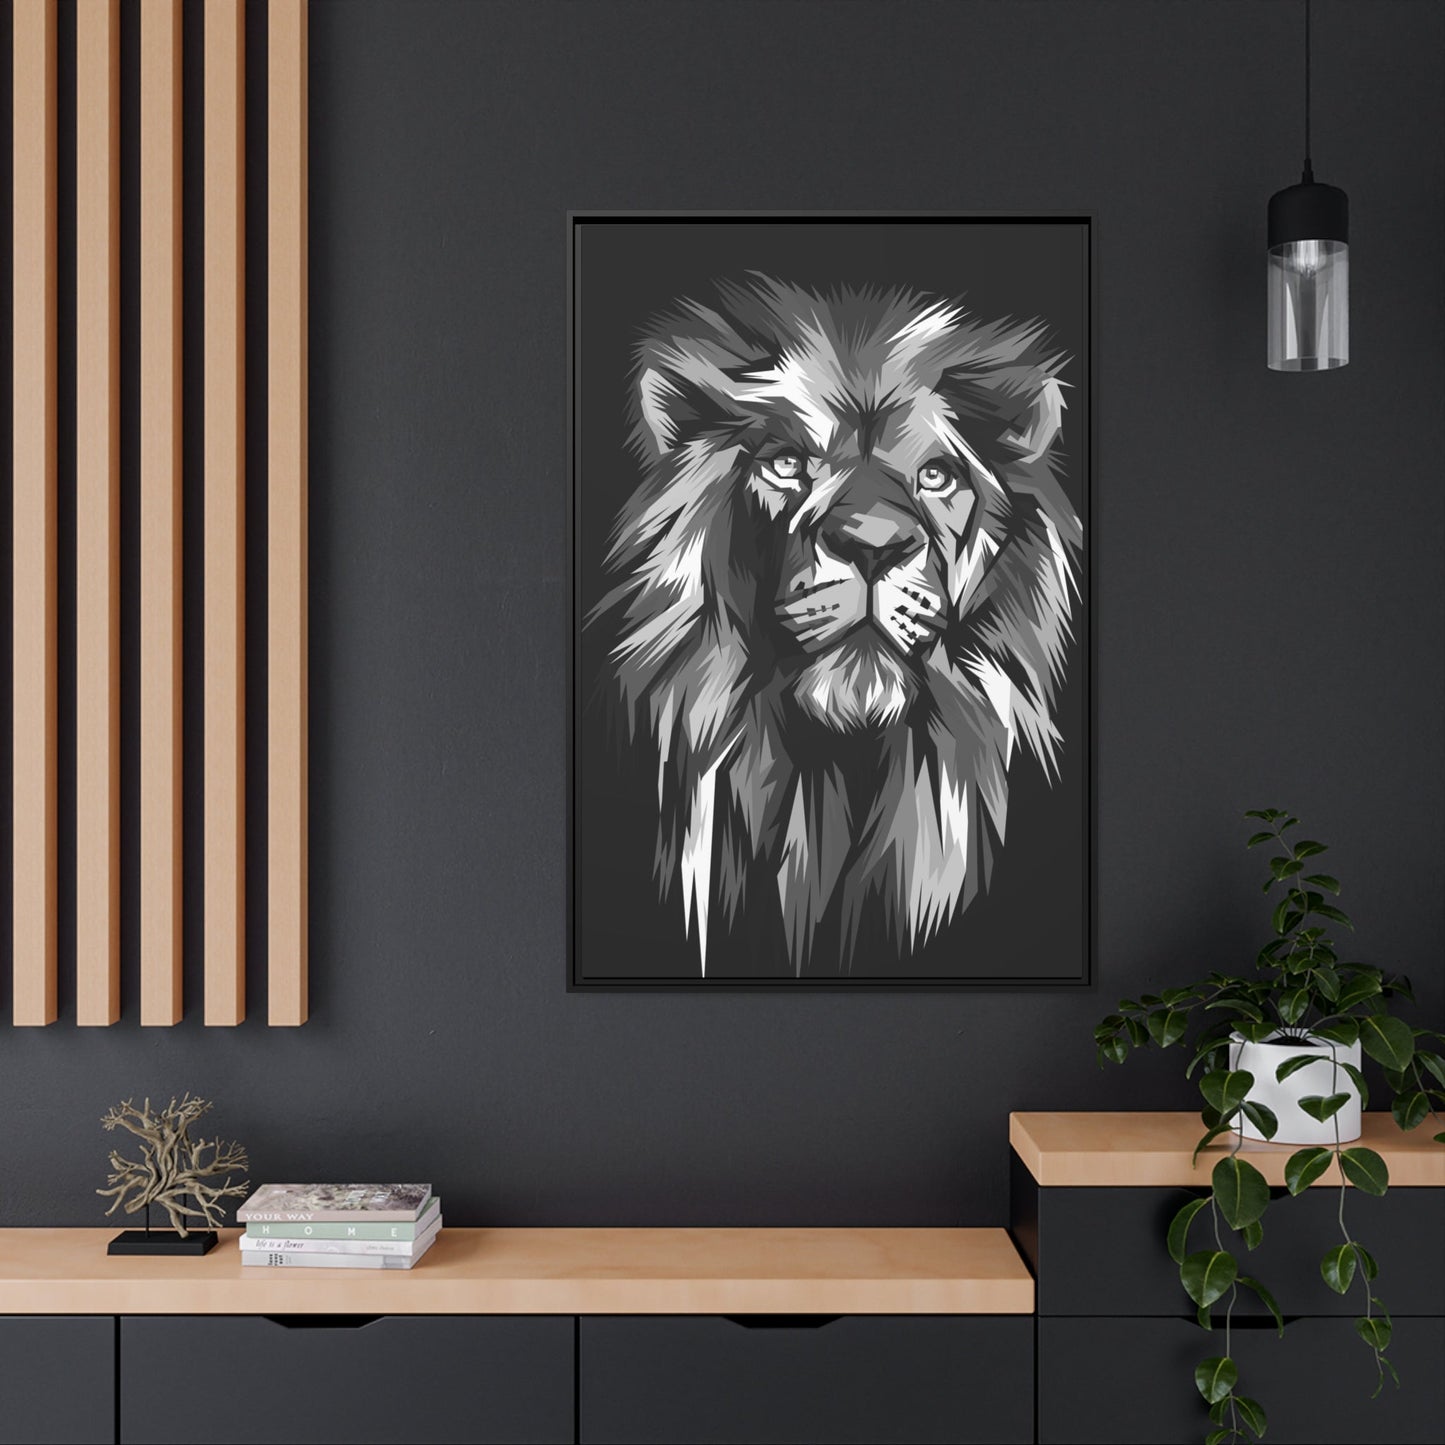 The Lion's Crown: Framed Poster of the King of the Jungle